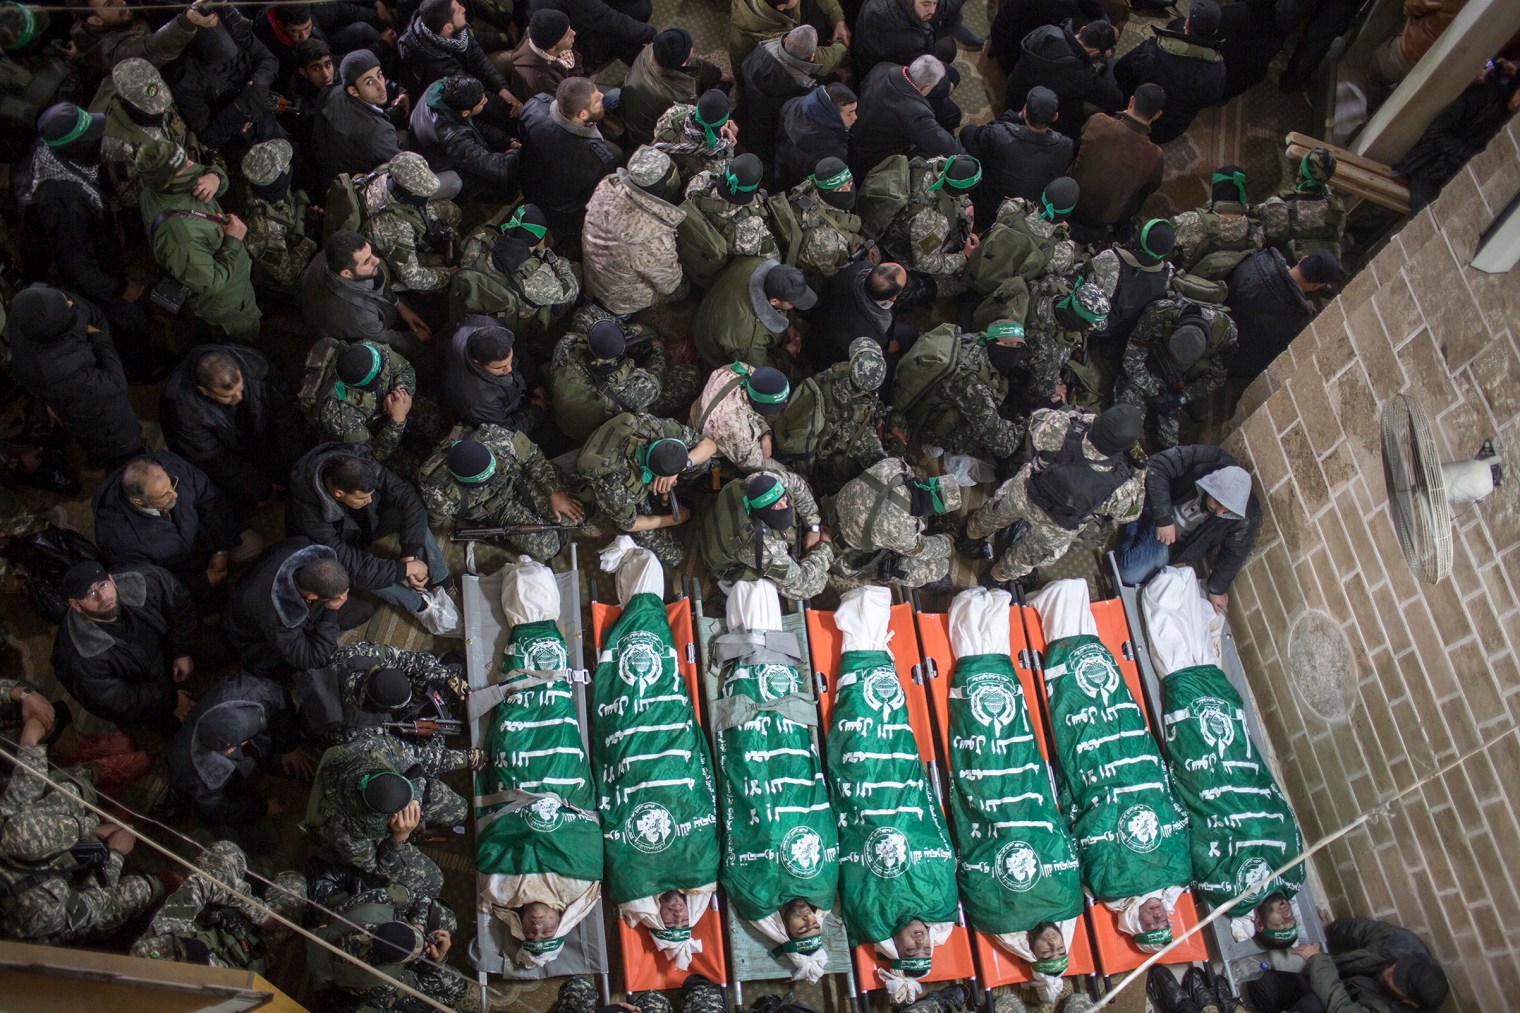 Palestinian fighters of the Izz Al-Din al-Qassam brigades, the military wing of Palestinian Hamas organization, sit around the bodies of seven fighters in Al Omari mosque during their funeral in Gaza City on January 29, 2016. Seven fighters from were killed after a tunnel built in the conflict with Israel collapsed.